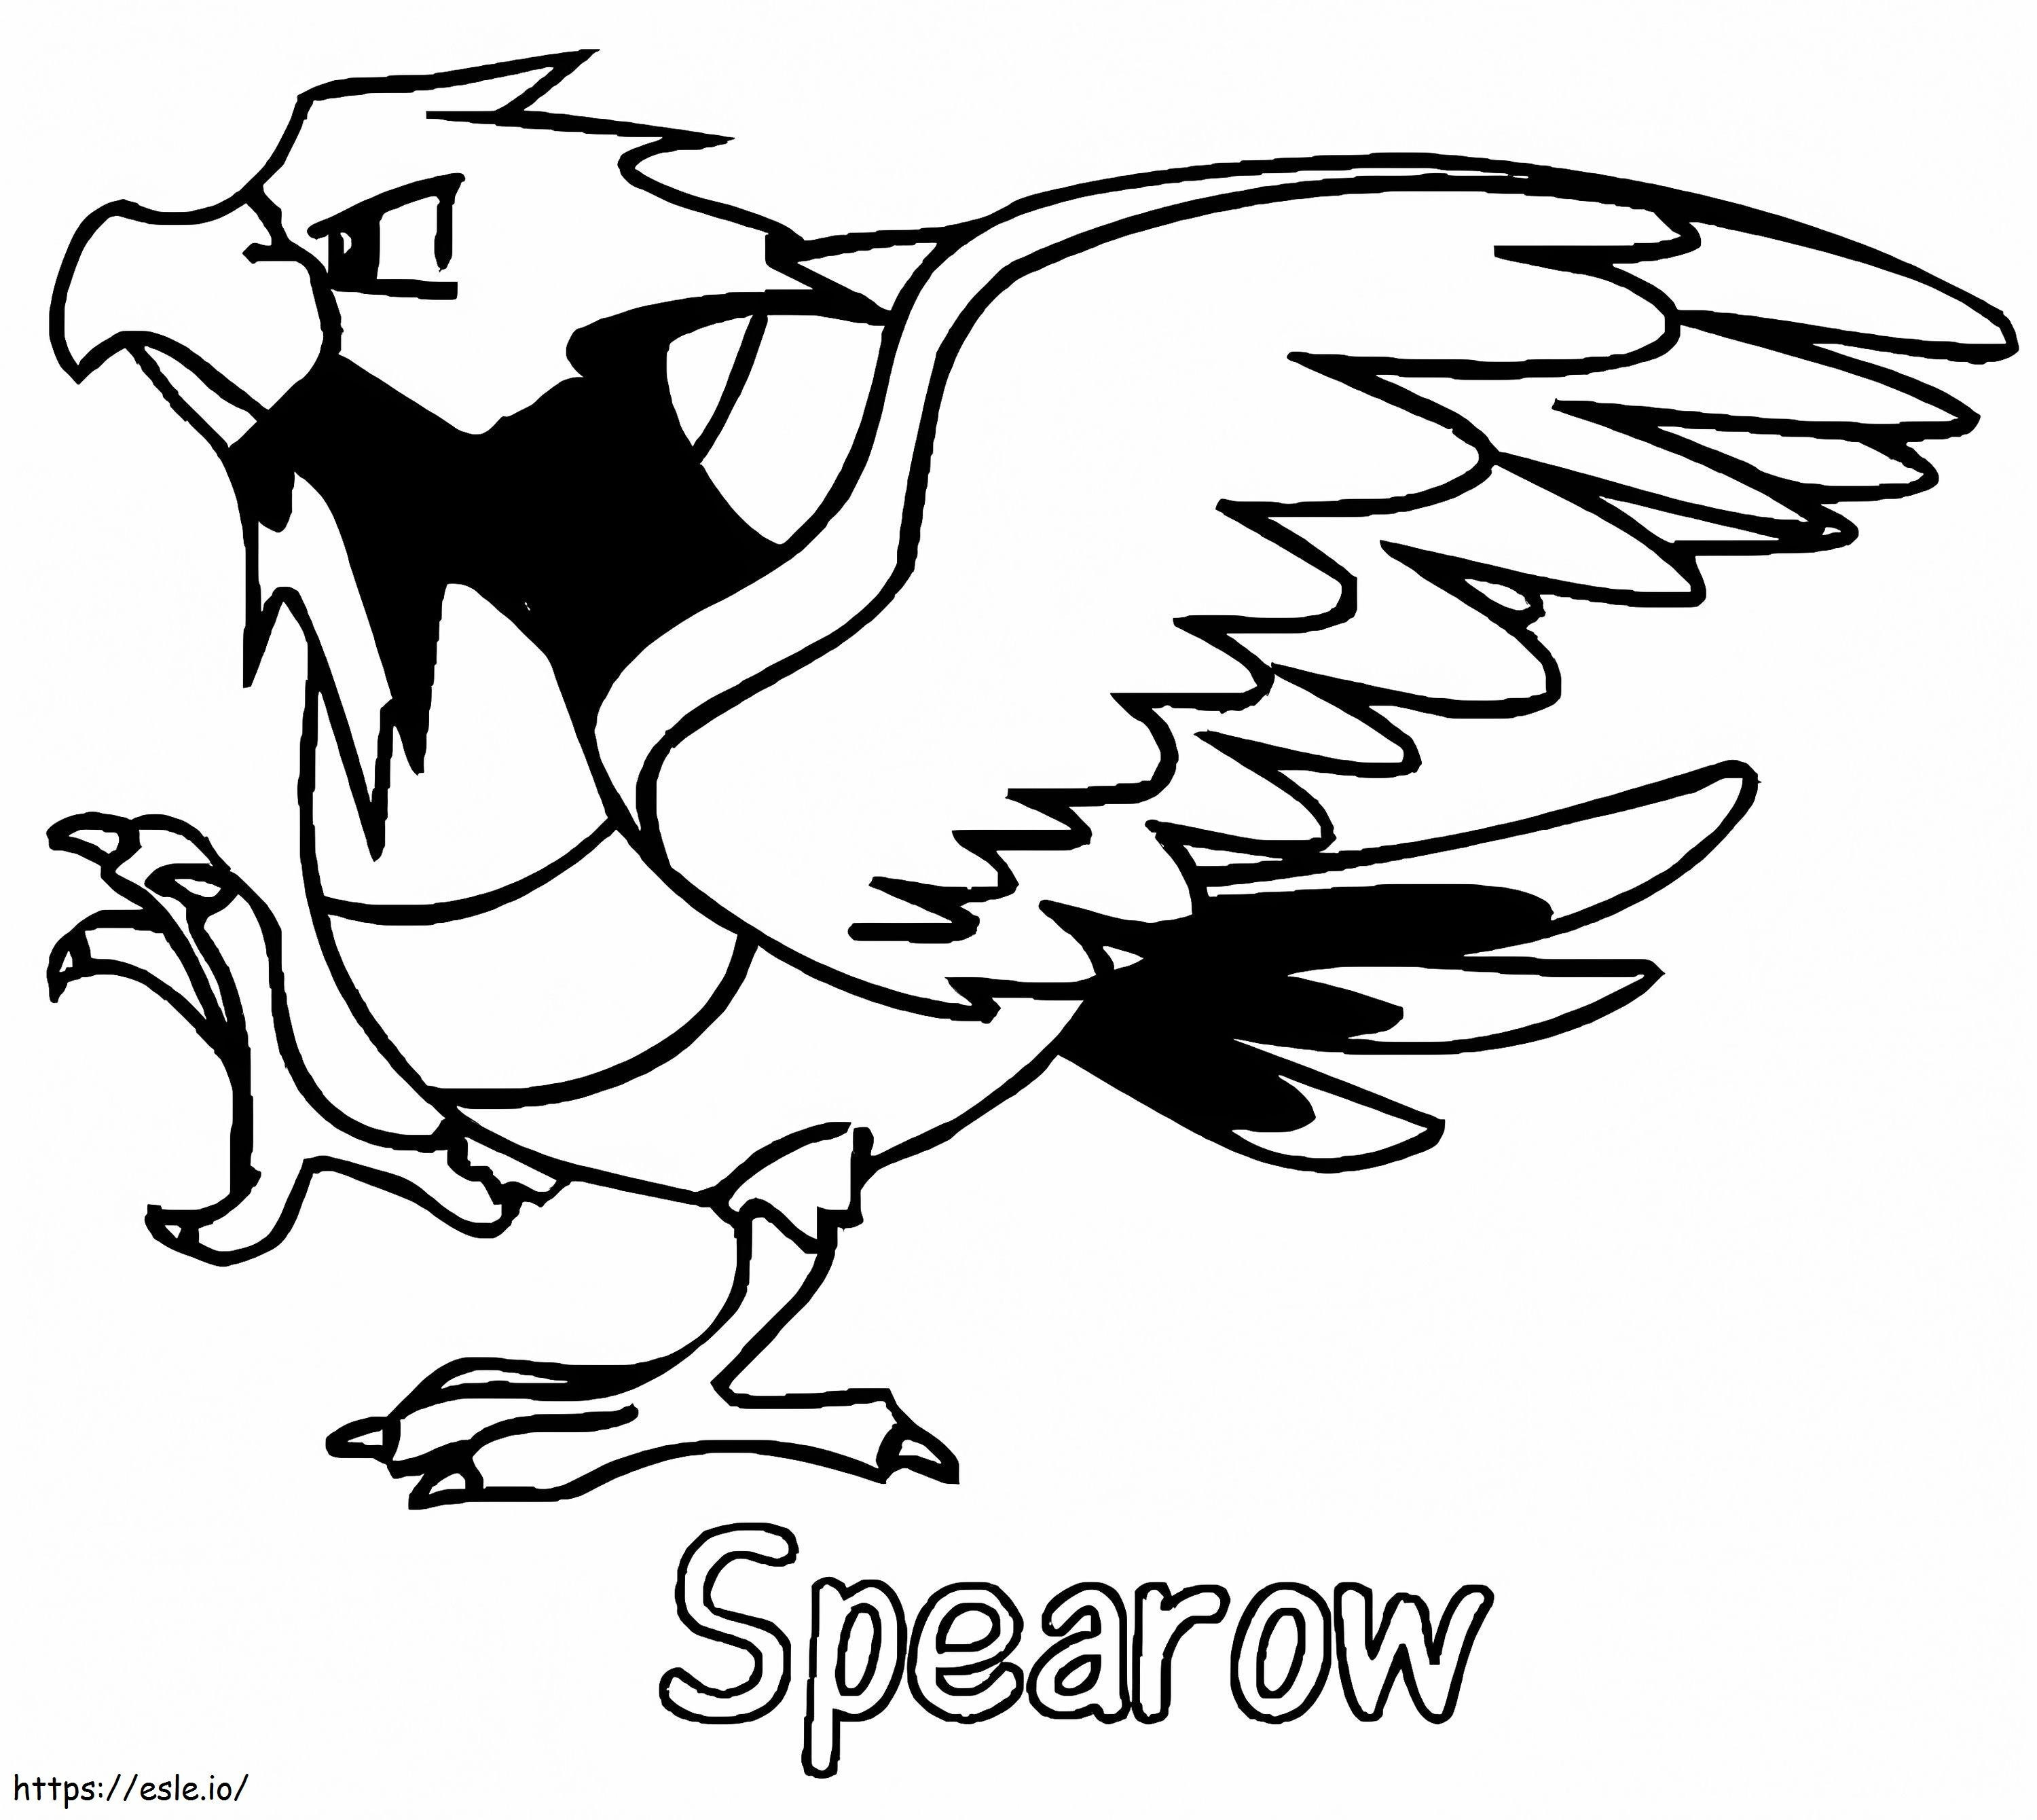 Spearow Pokemon 4 coloring page